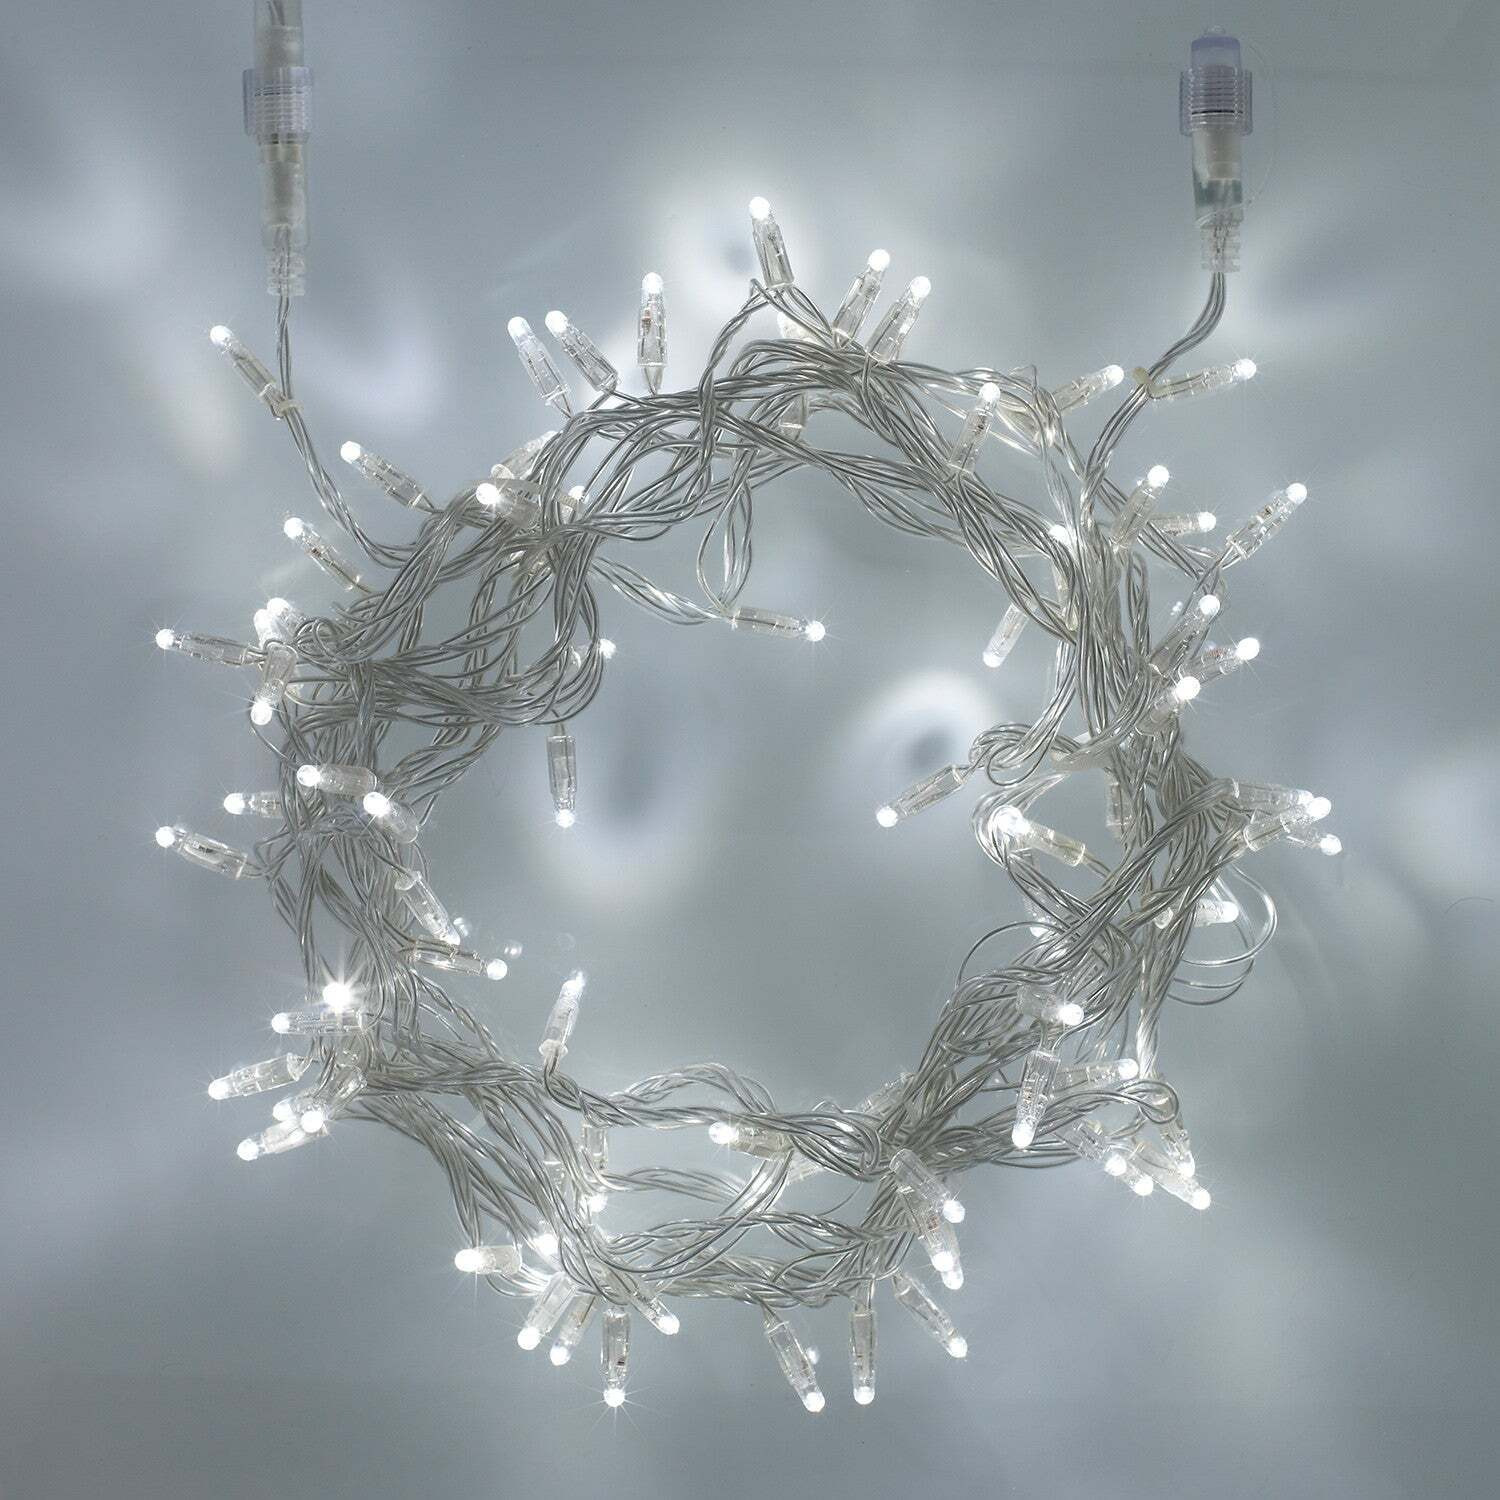 Core Connect 10m 100 White Connectable Fairy Lights Clear Cable - image 1